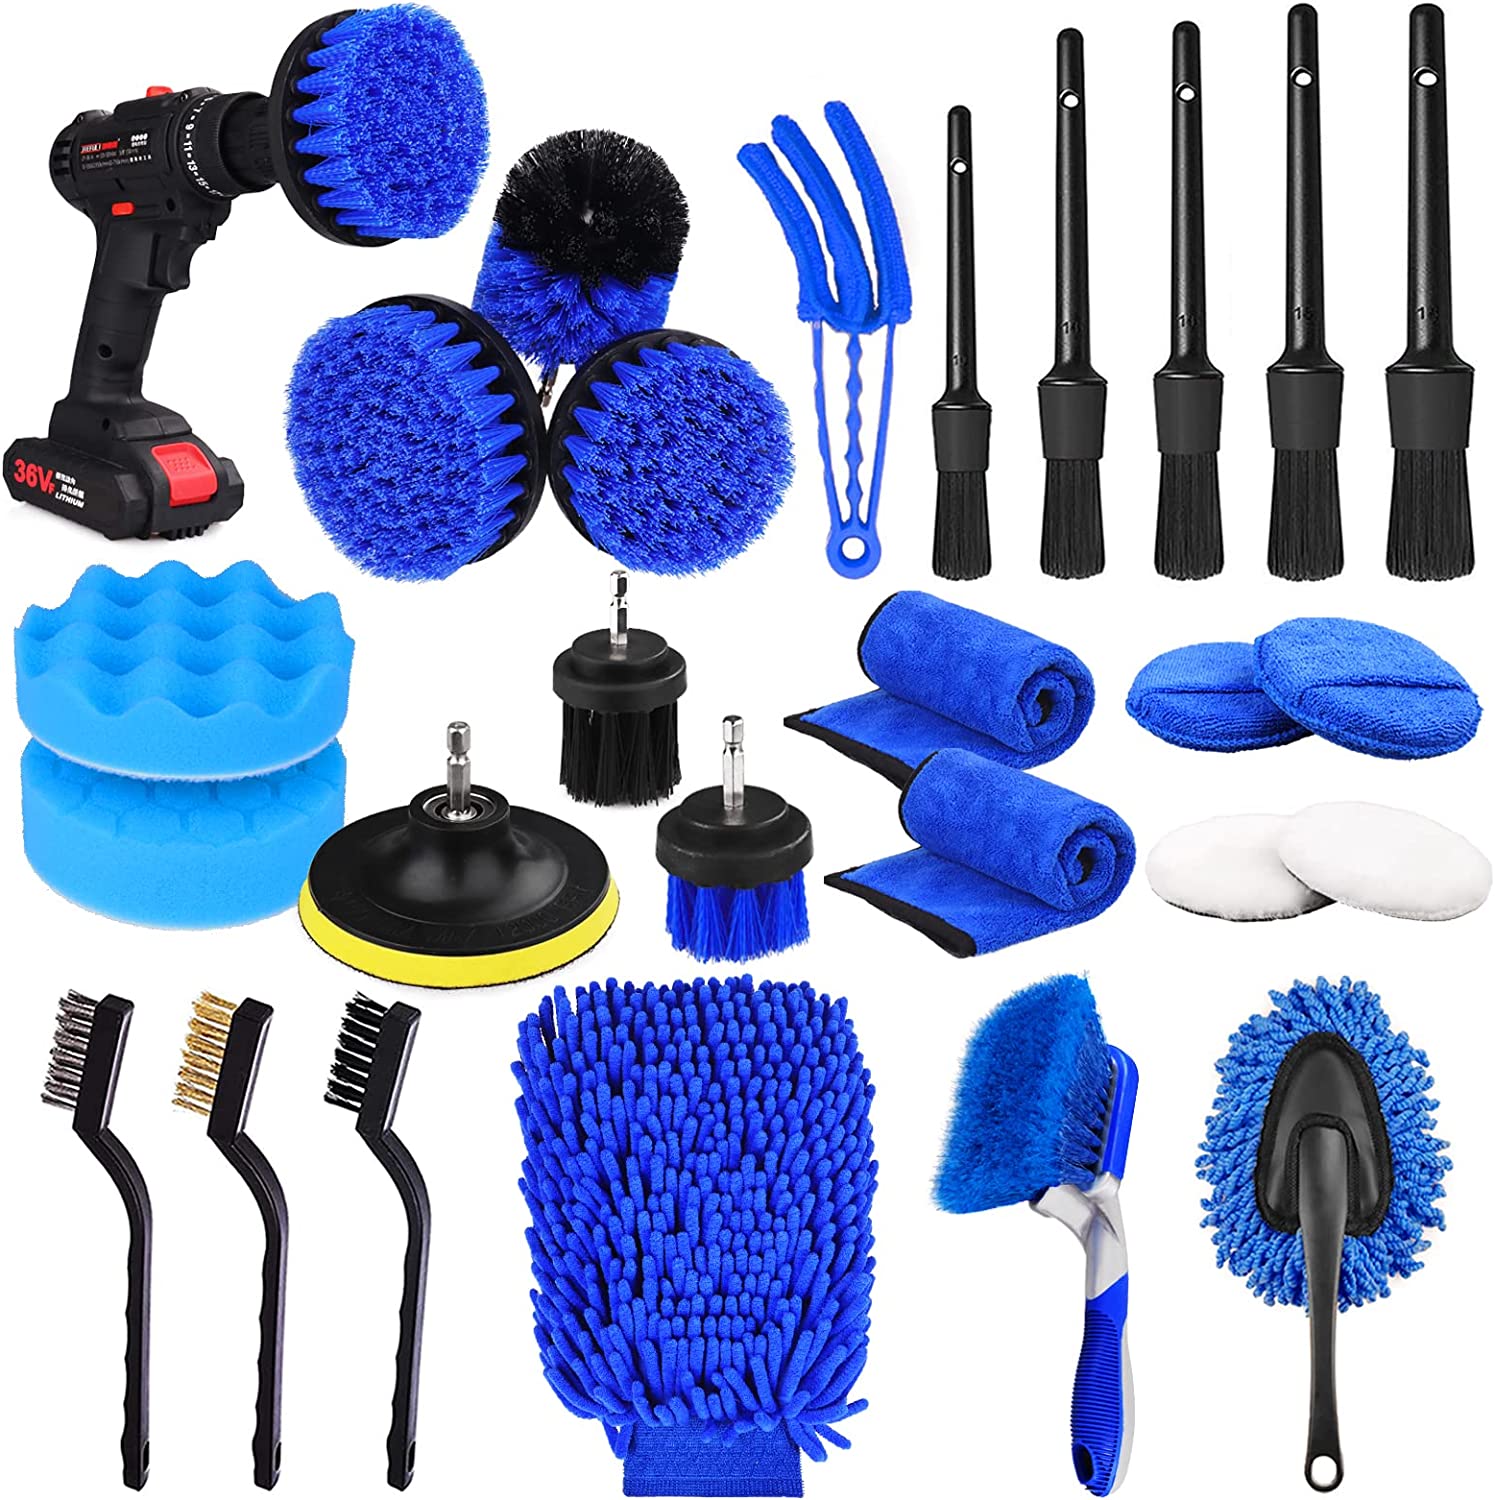 Nurkul 11 Pieces Auto Detailing Brush Set for Cleaning Wheels